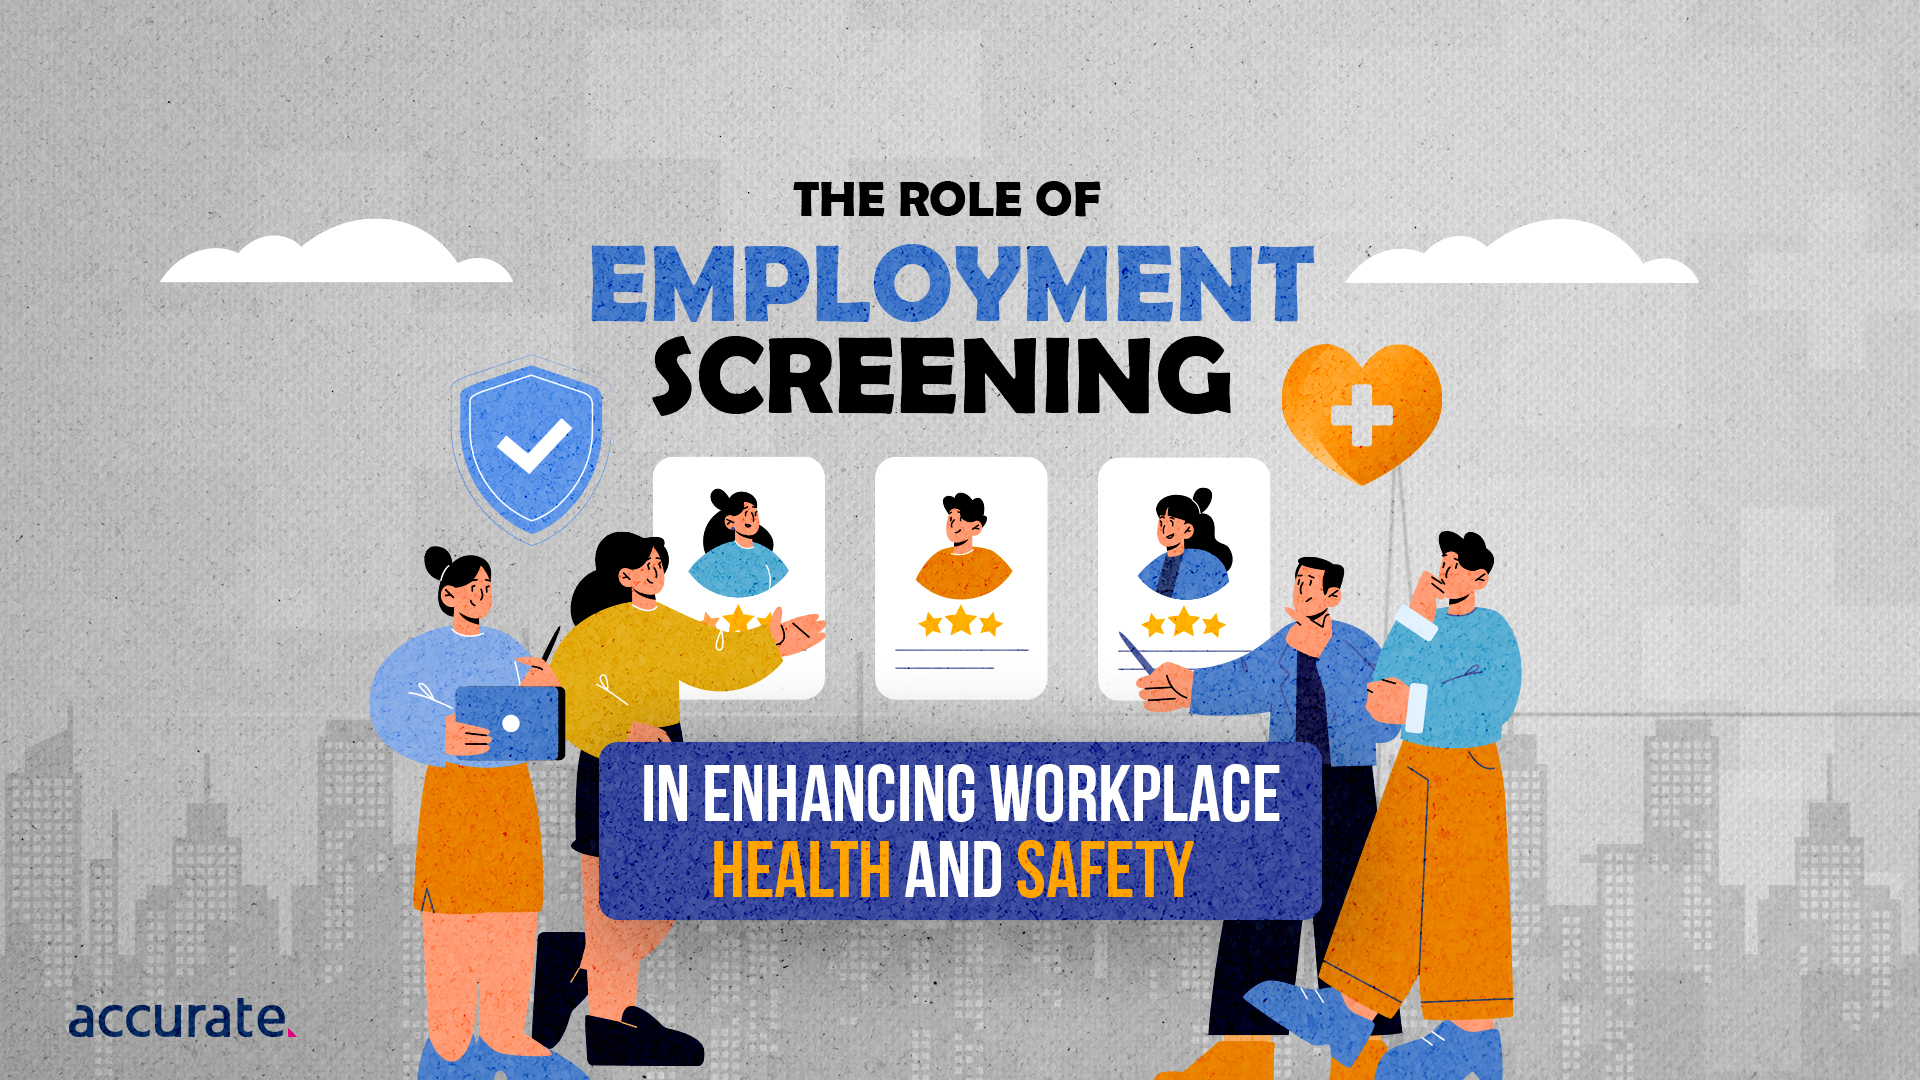 Featured Image - The Role of Employment Screening in Enhancing Workplace Health and Safety